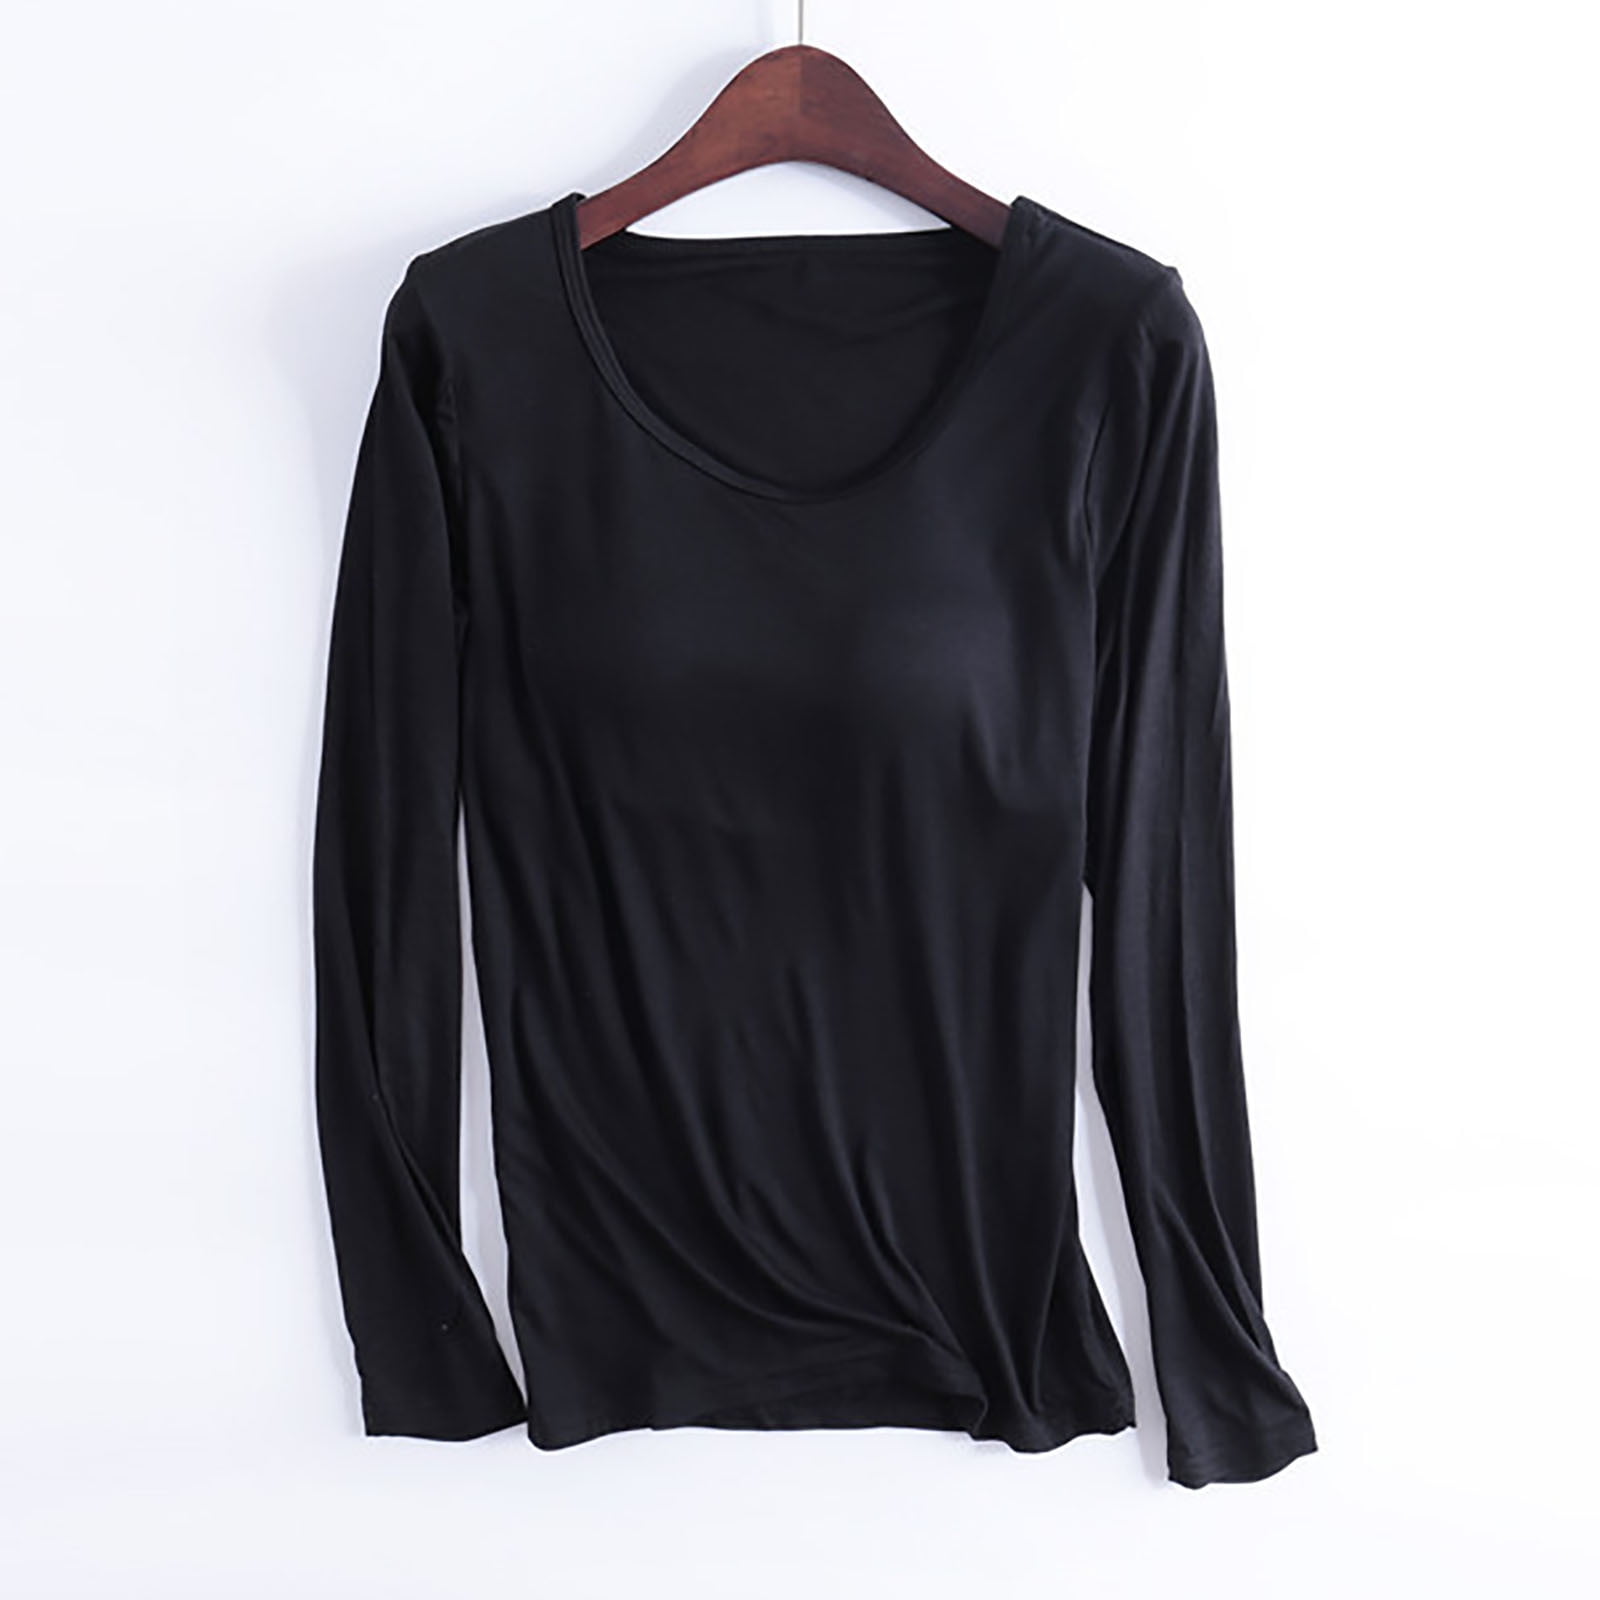 Wyongtao Womens Long Sleeve T-Shirt with Built in Padded Bra, Regular Fit  Built in Shelf Bra Solid Tops Black M